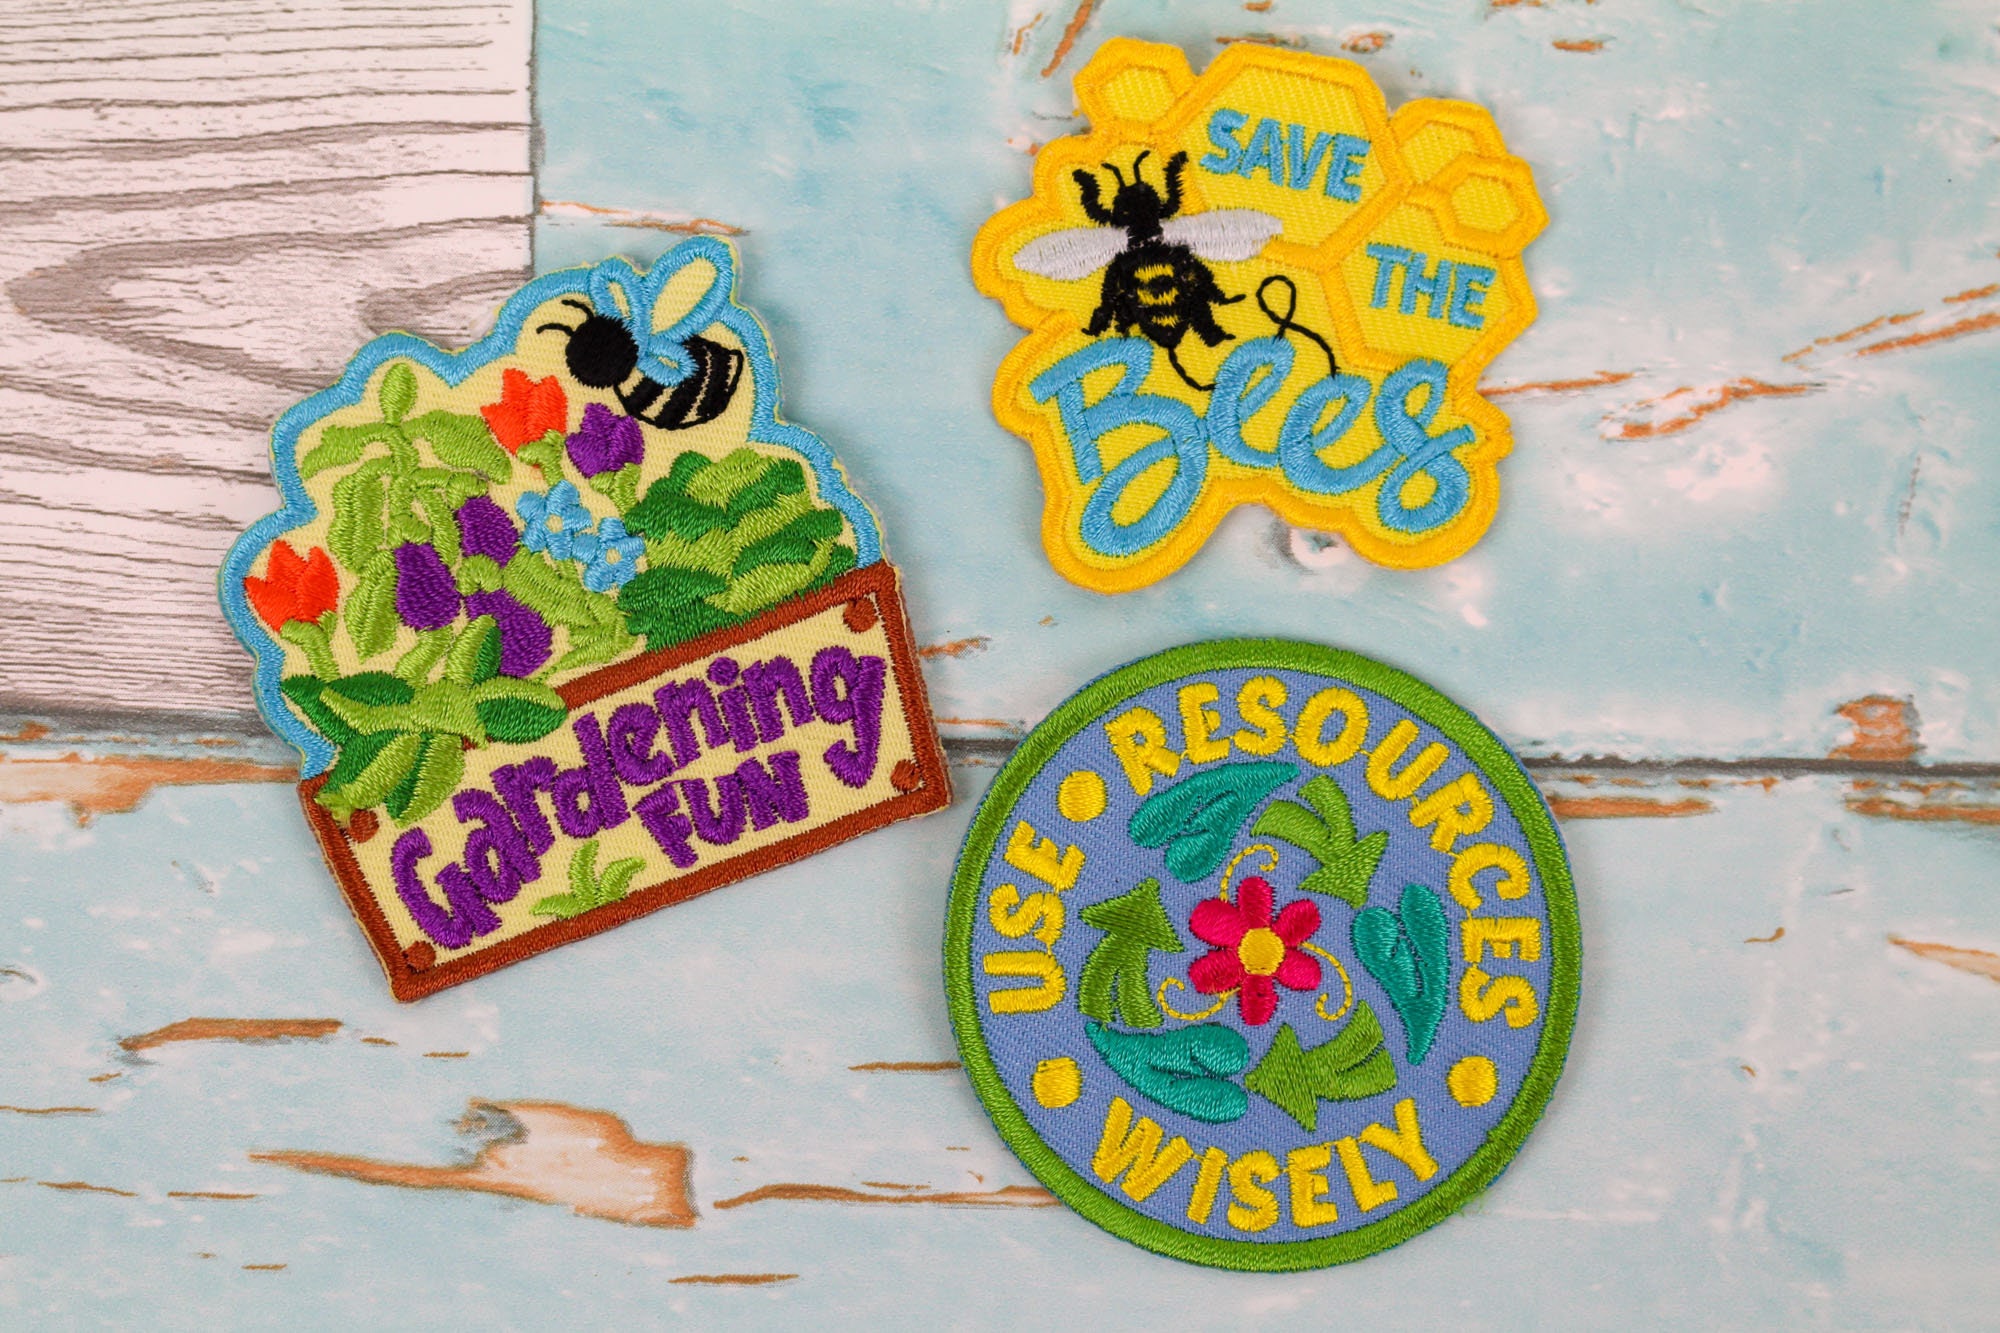 2pcs Iron on Patches for Clothing – Bee Kind Theme Embroidered Iron on  Patches for Clothes, Backpacks, Jeans, Shirt, Jacket, Dress, Hat, Bag,  Custom